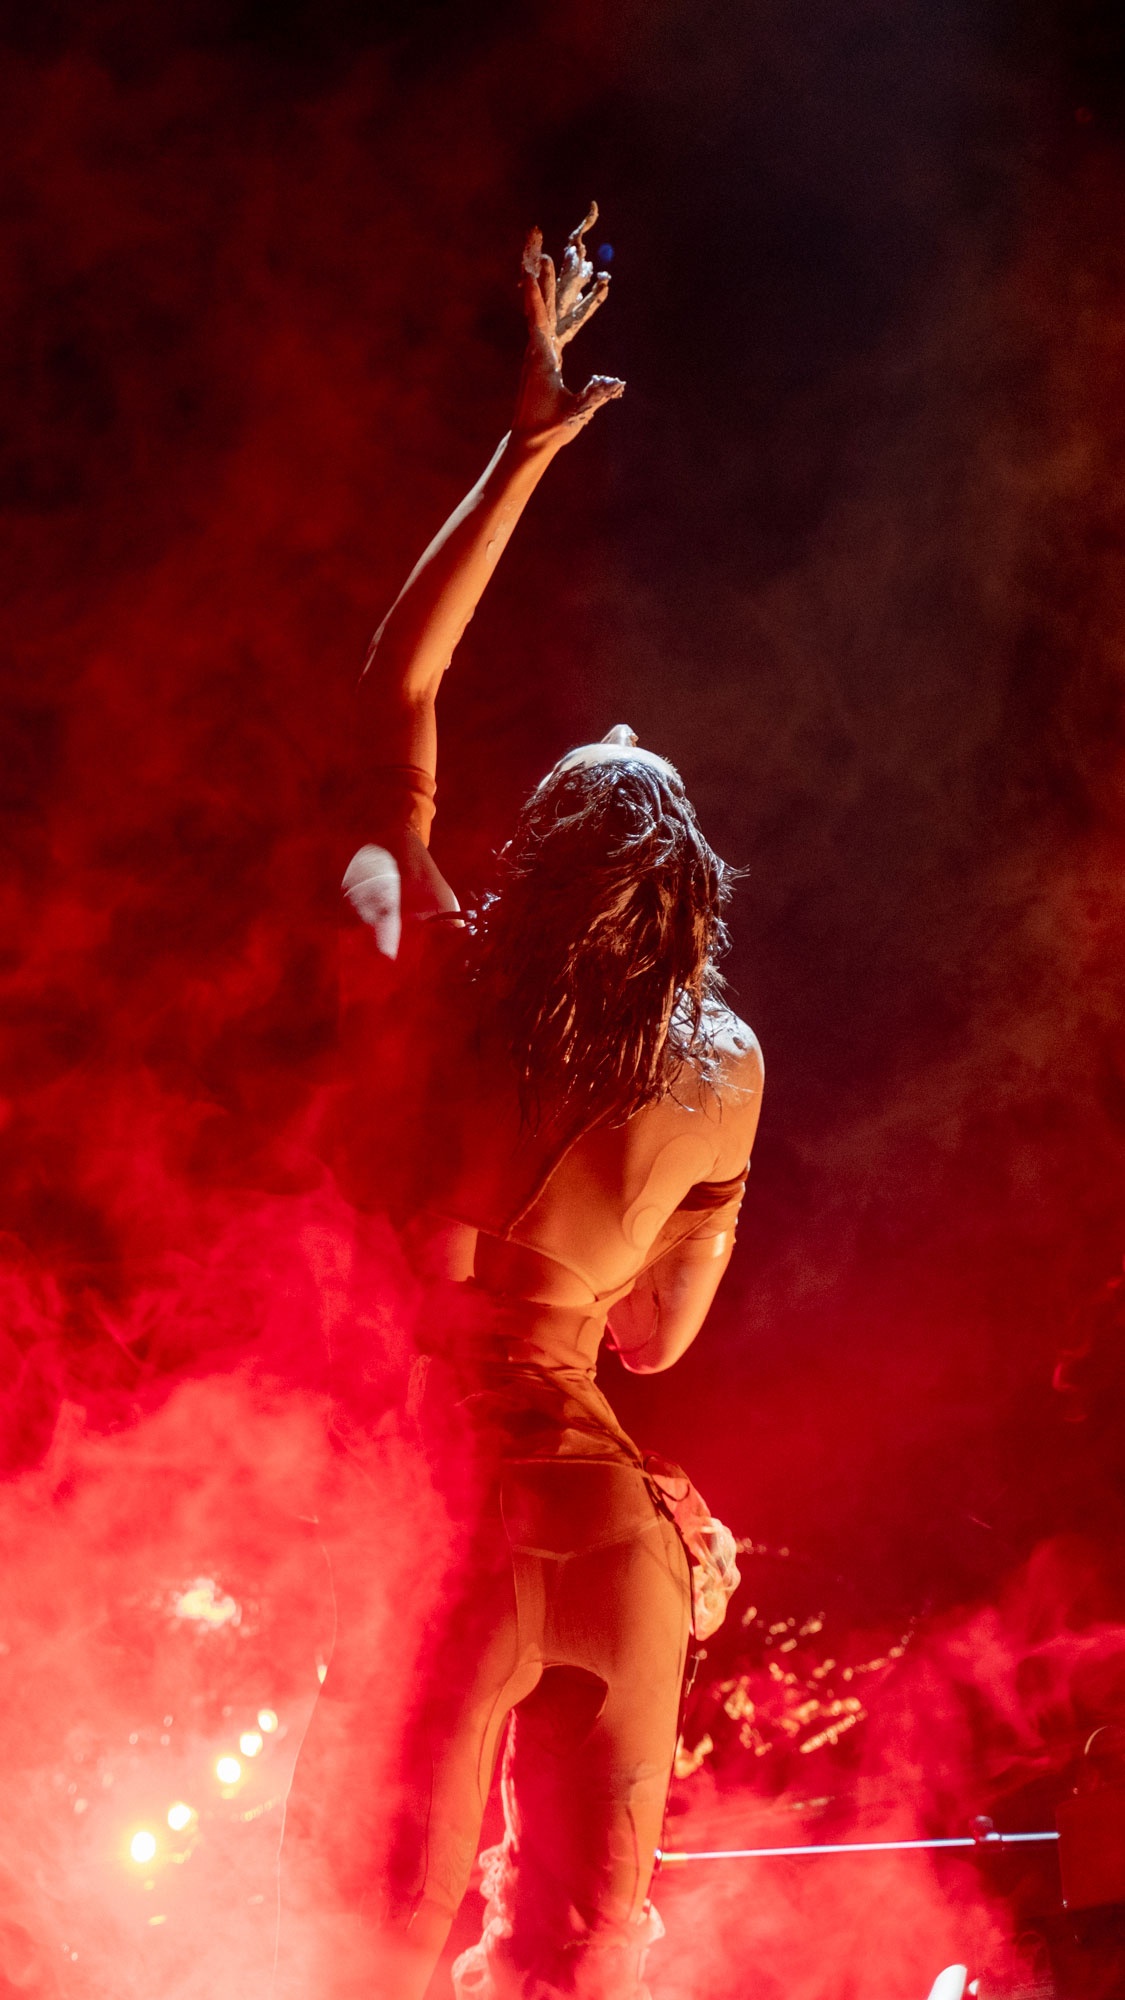 Arca performing on stage with arm in the air and red smoke.